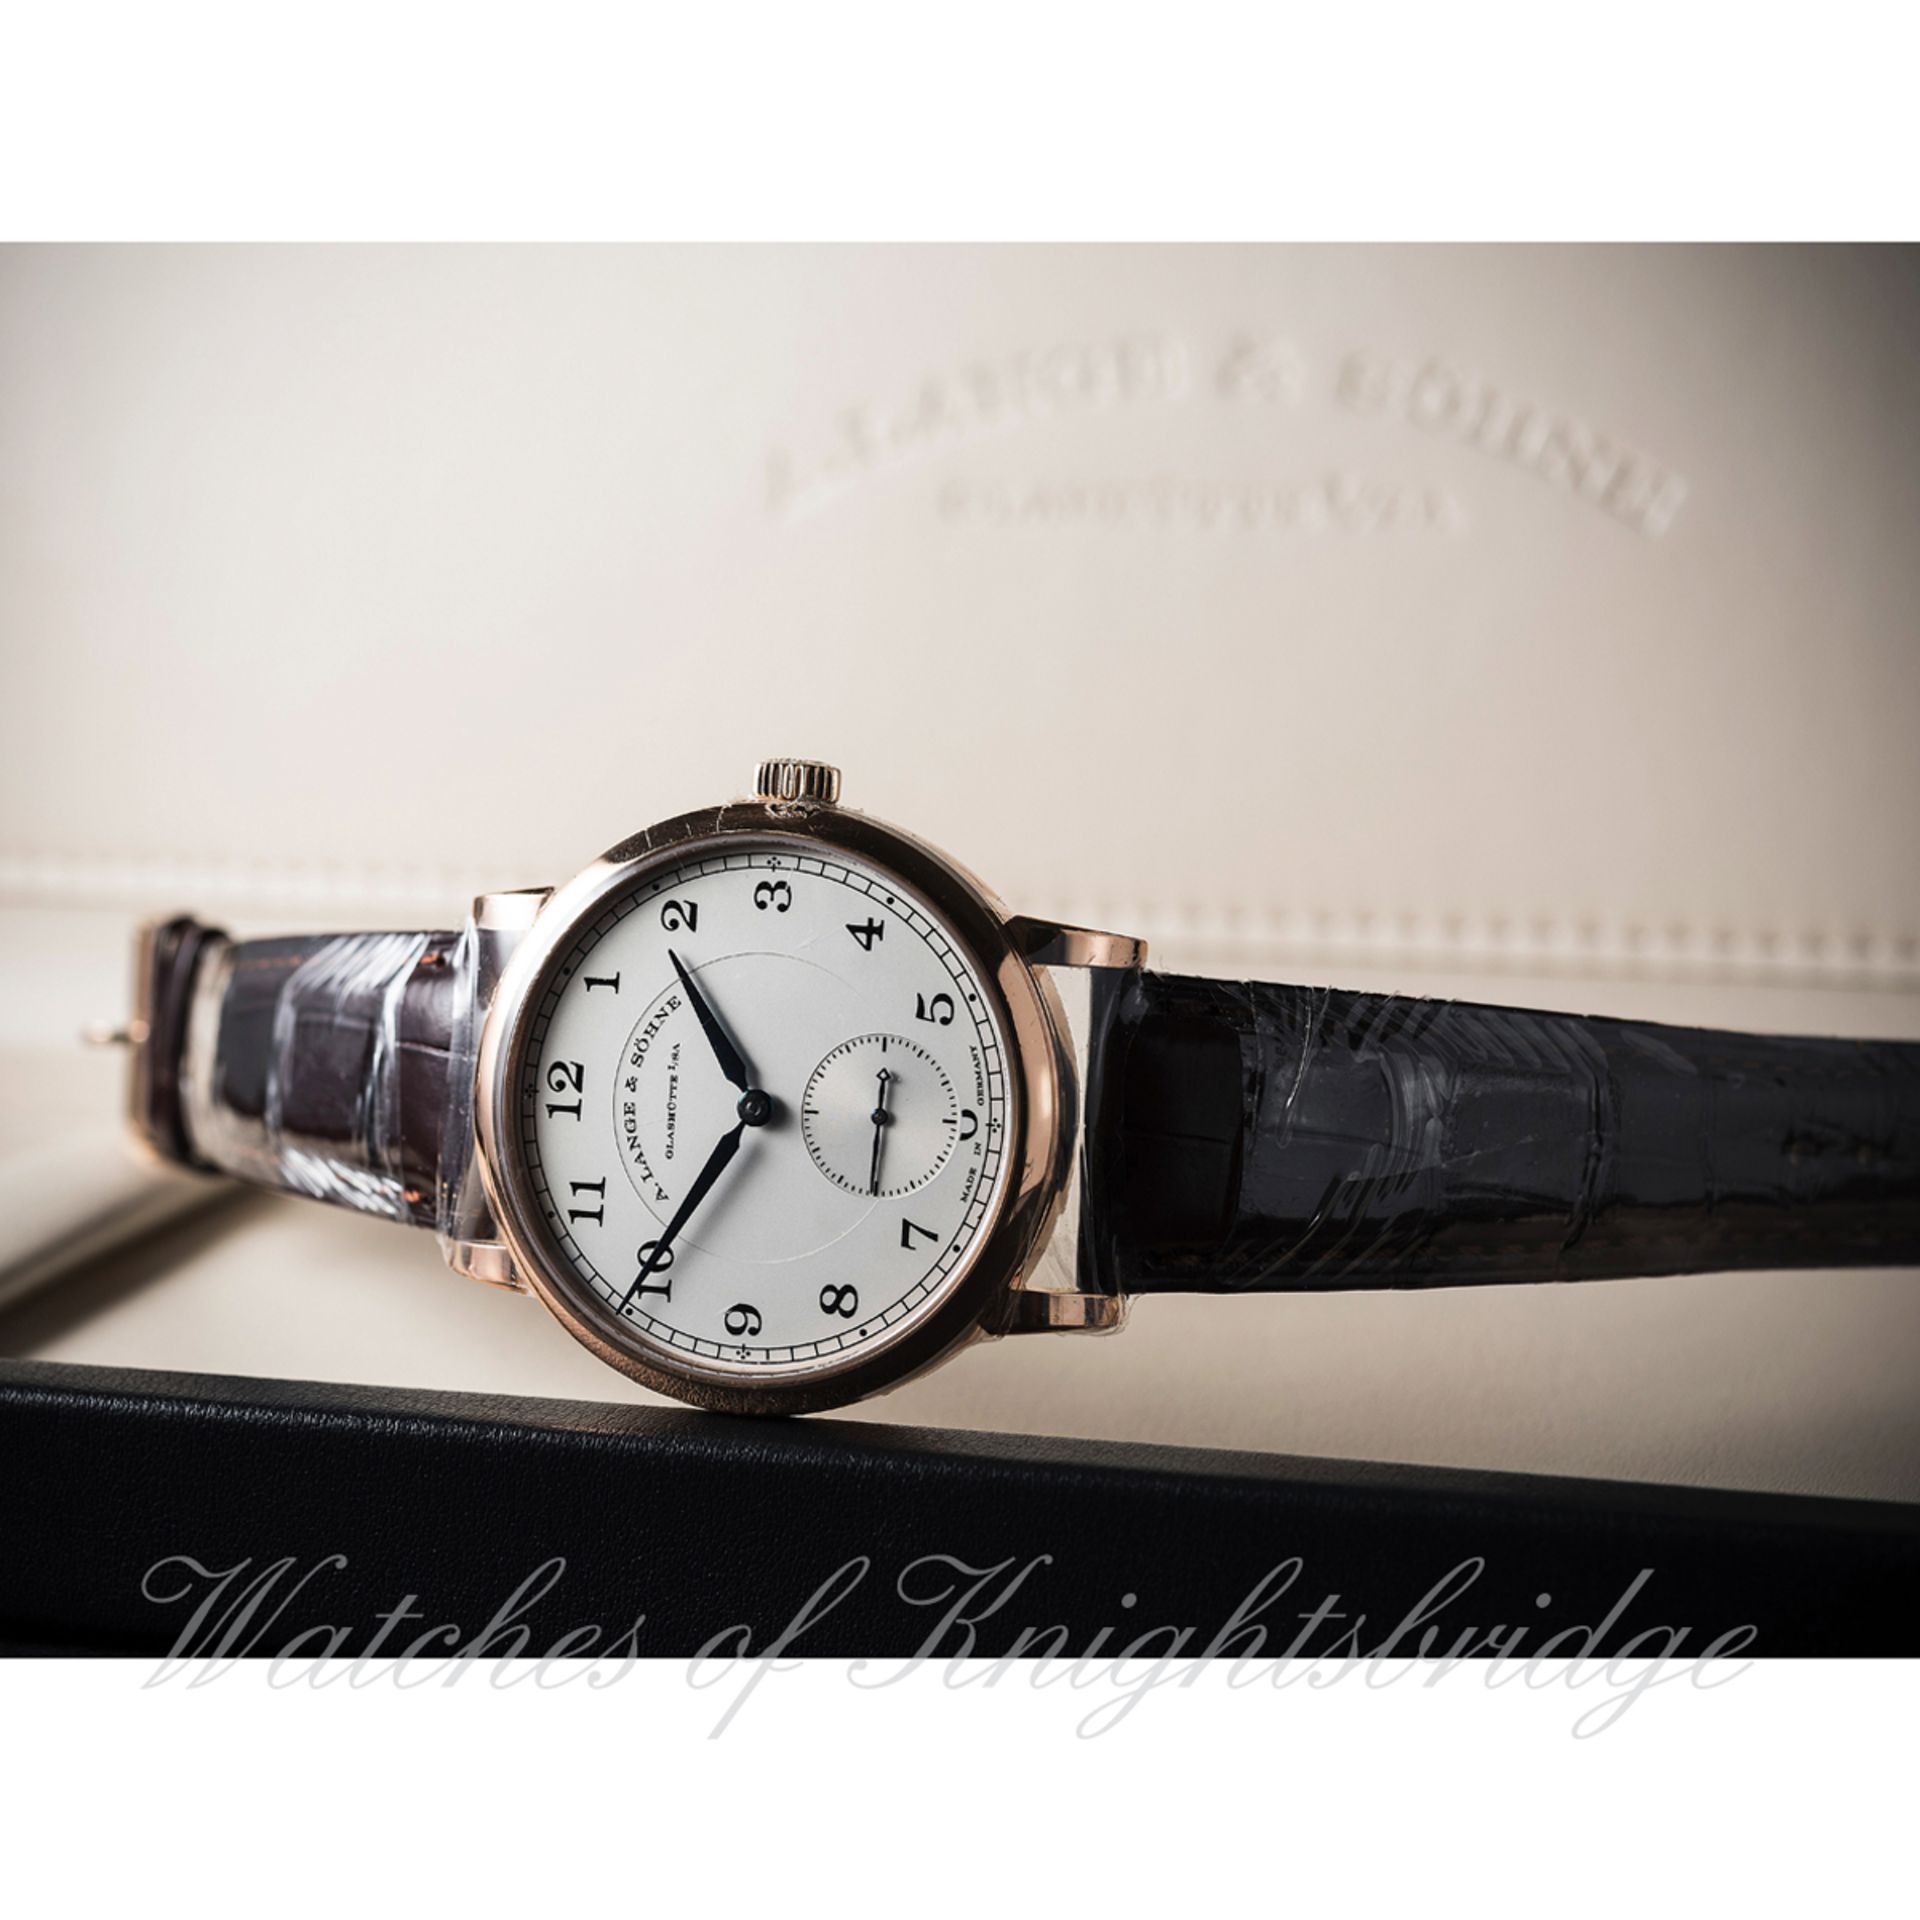 A FINE GENTLEMAN'S 18K SOLID ROSE GOLD A. LANGE & SOHNE 1815 WRIST WATCH DATED 2015, REF. 235.032 - Image 2 of 2